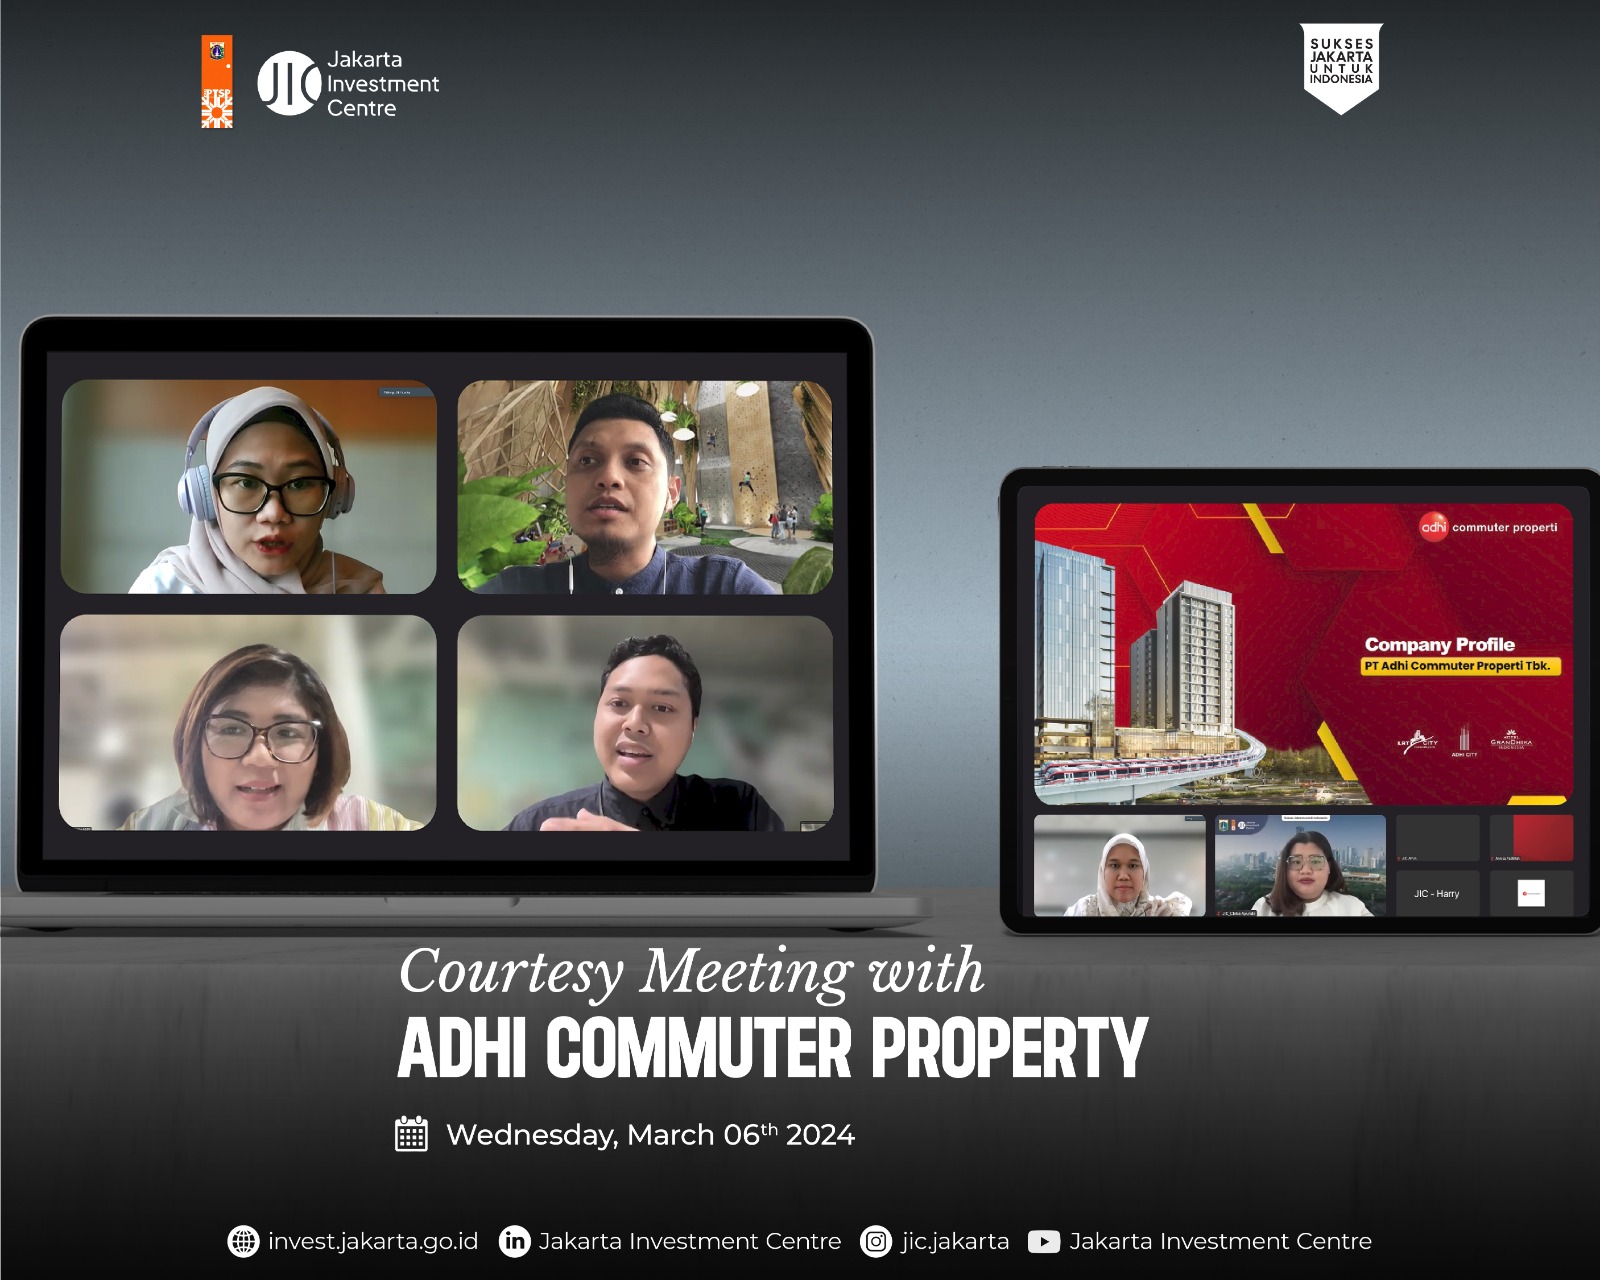 Courtesy Meeting with Adhi Commuter Property